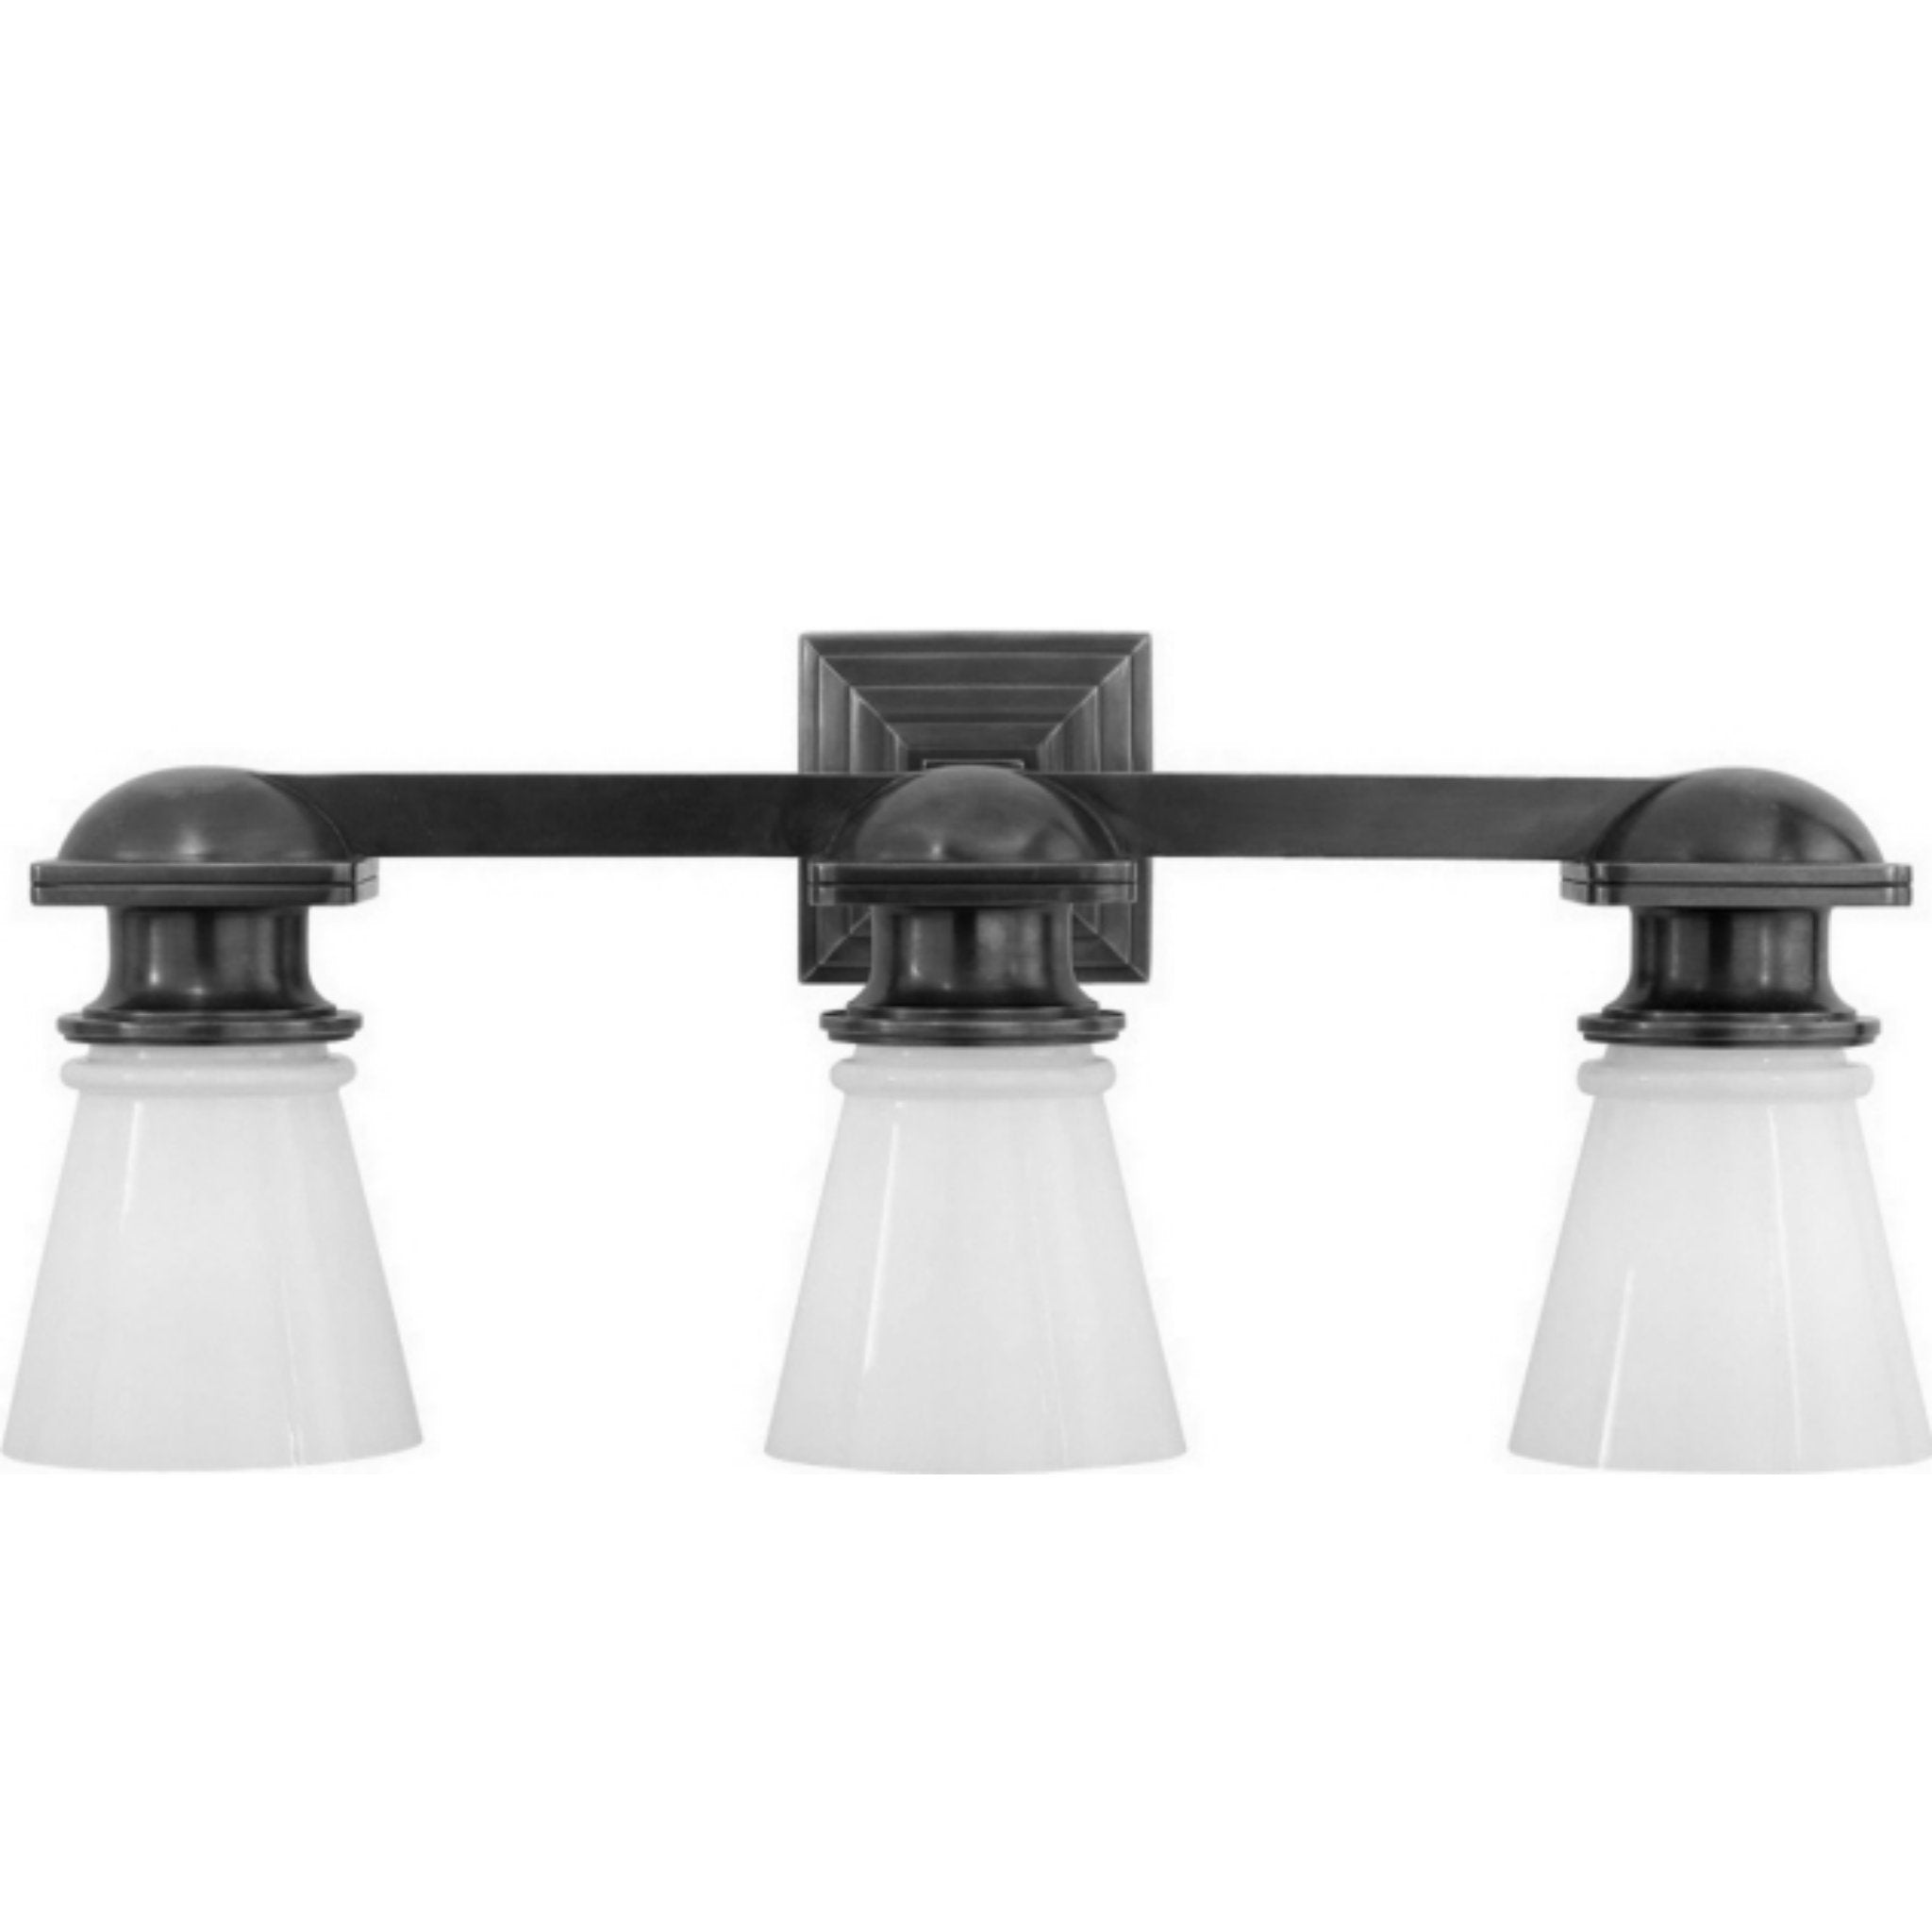 Chapman & Myers New York Subway Triple Light in Polished Nickel with White Glass